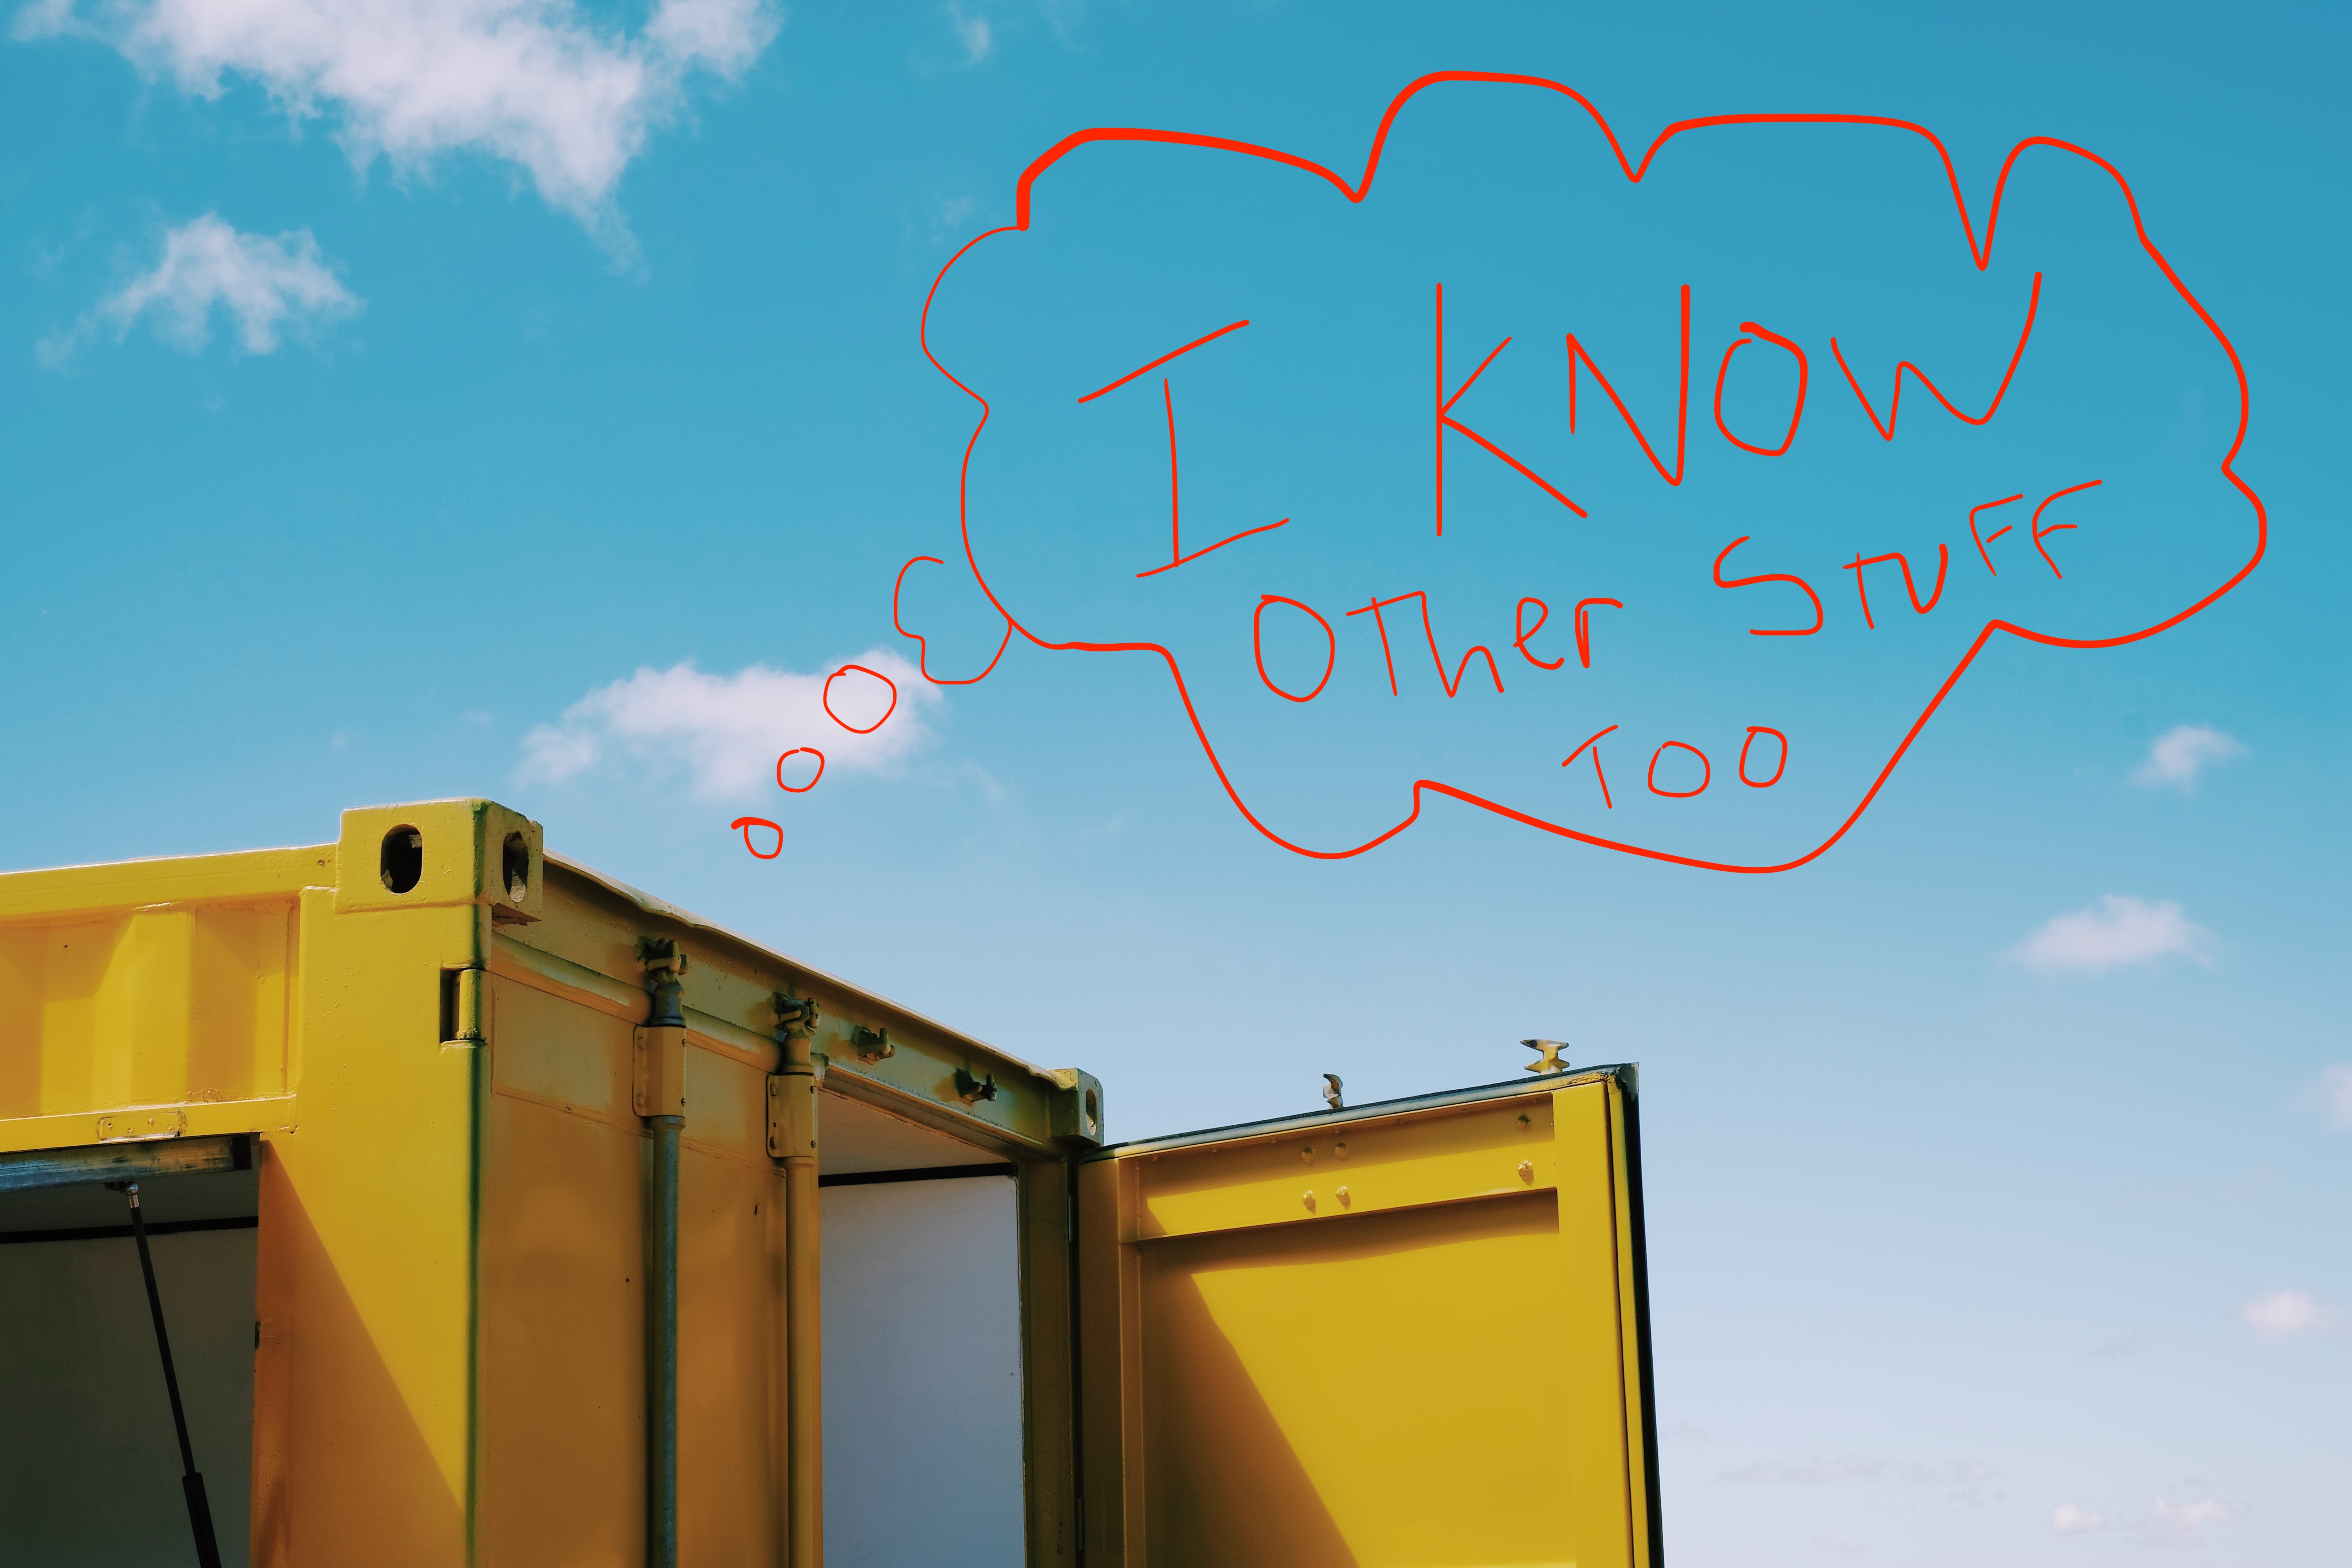 Yellow shipping container
with a red hand-written speech bubble:
I know other stuff too
